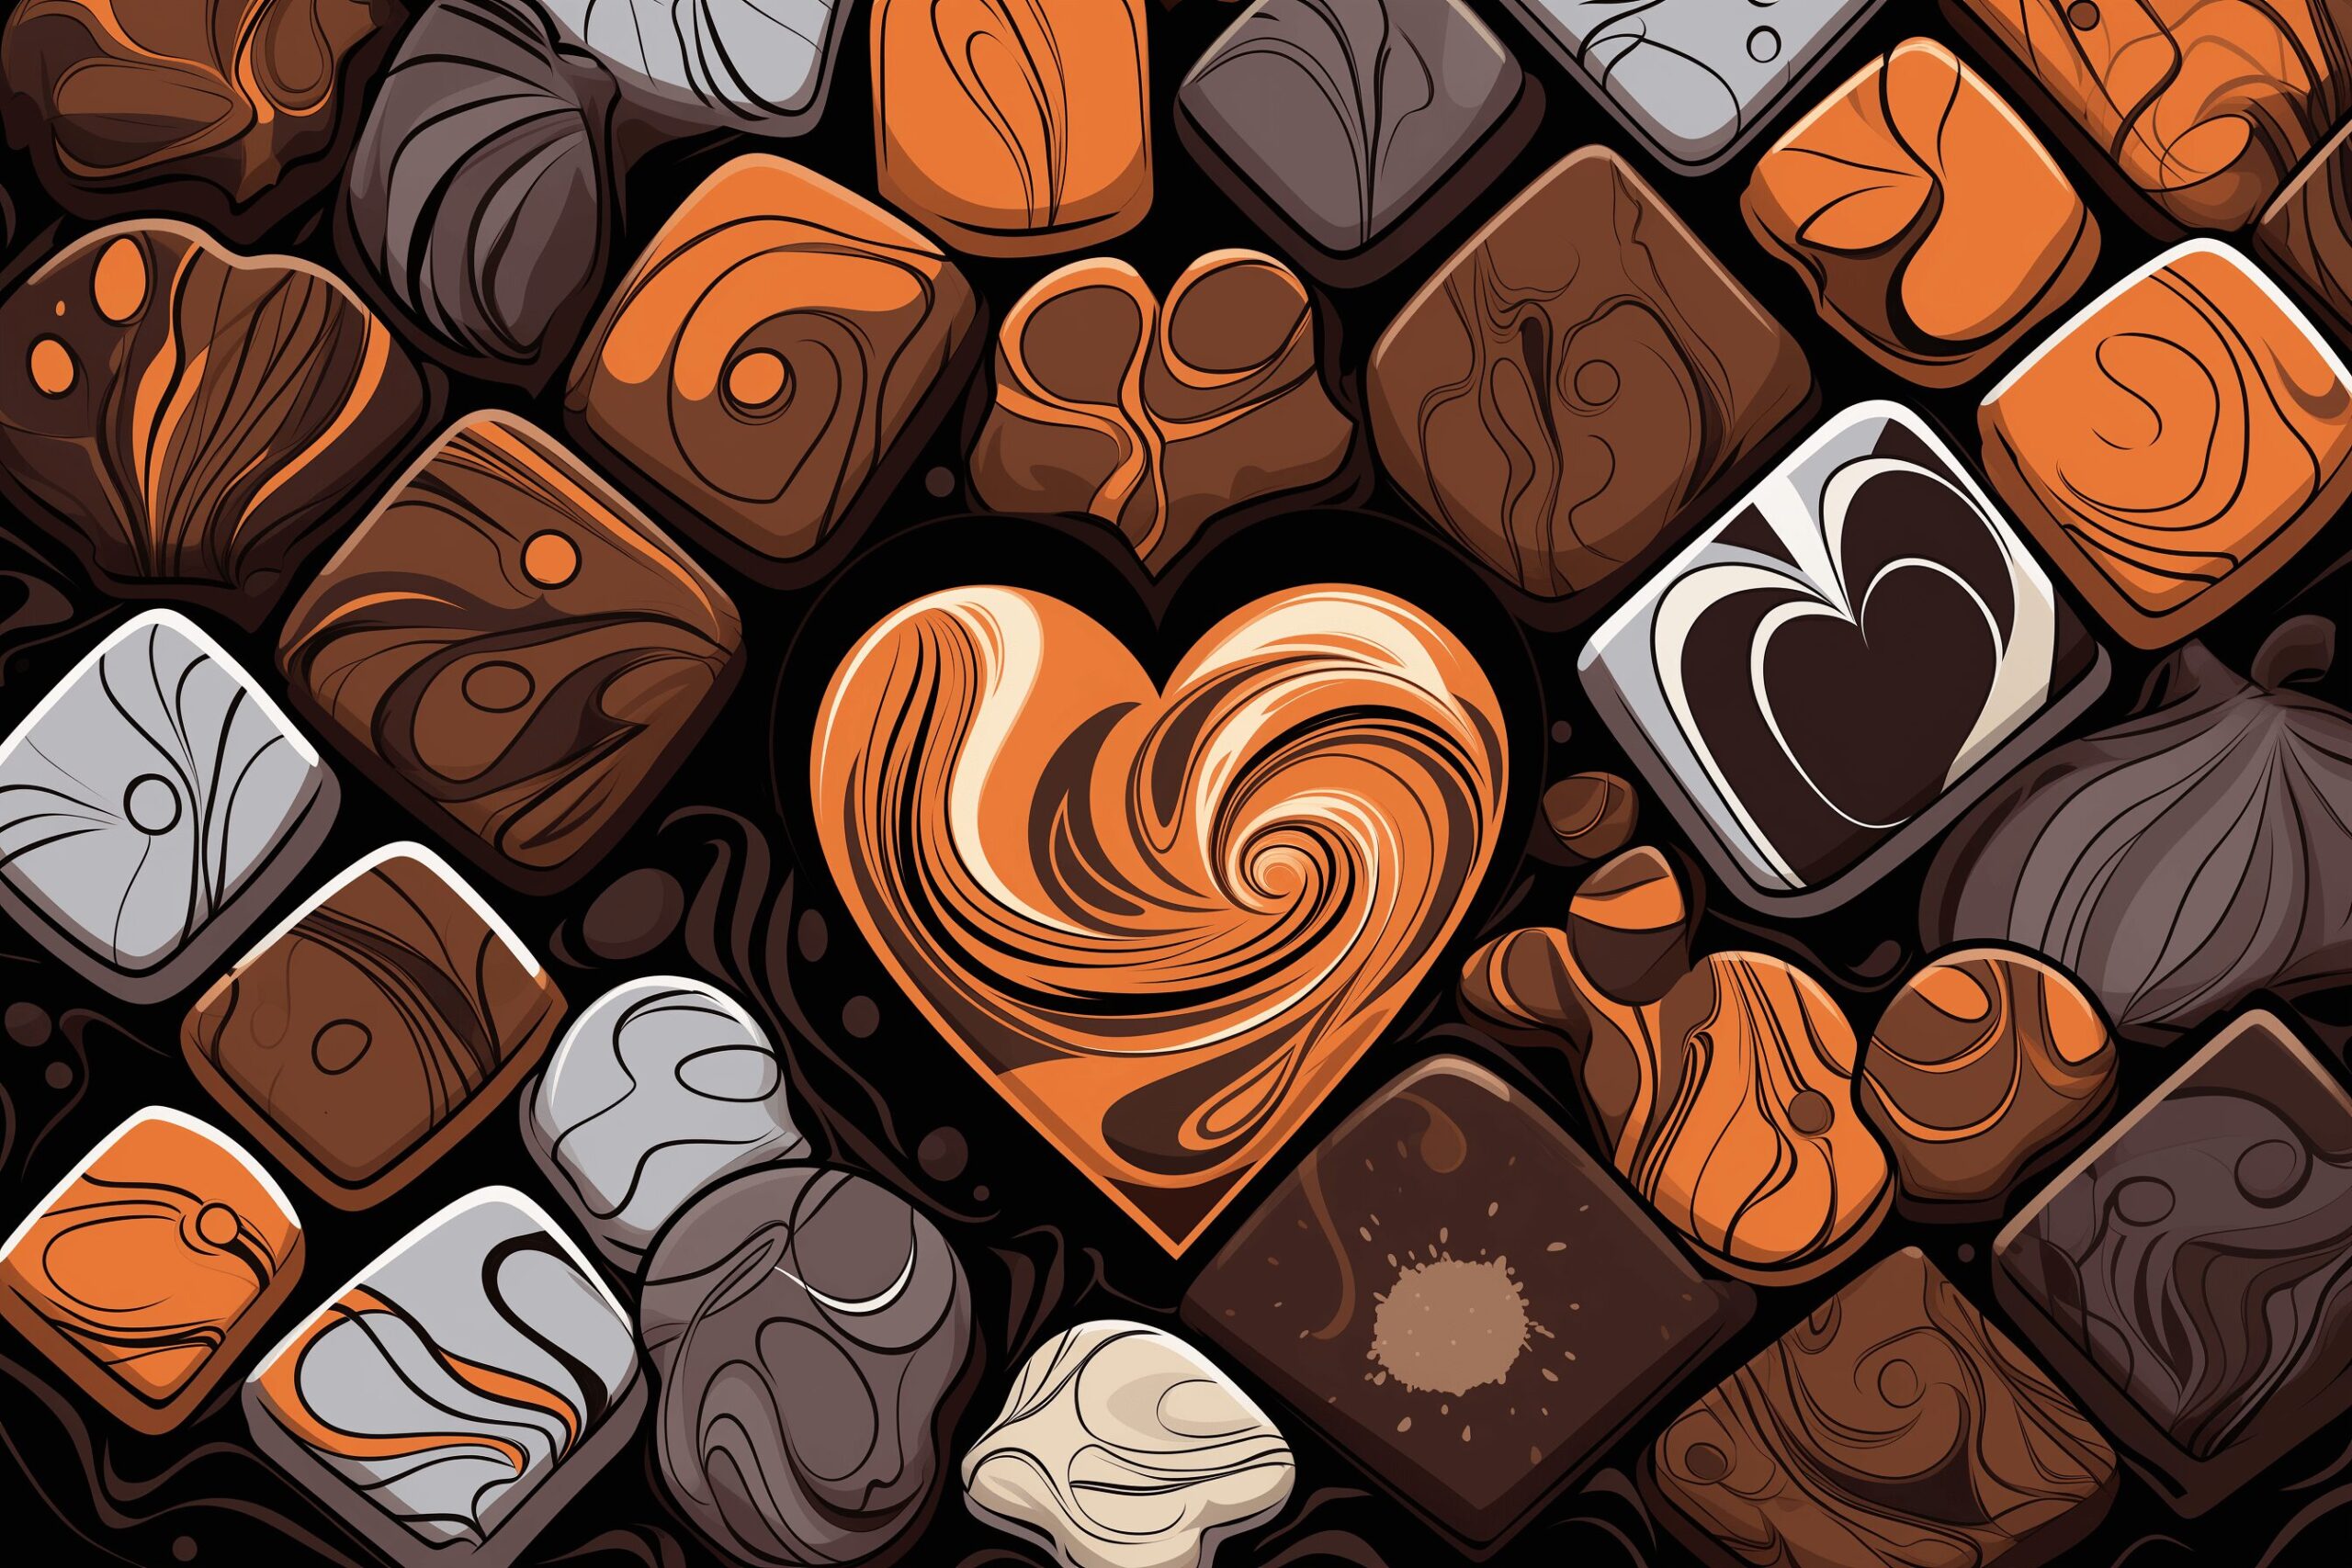 A selection of Valentine's Day chocolates